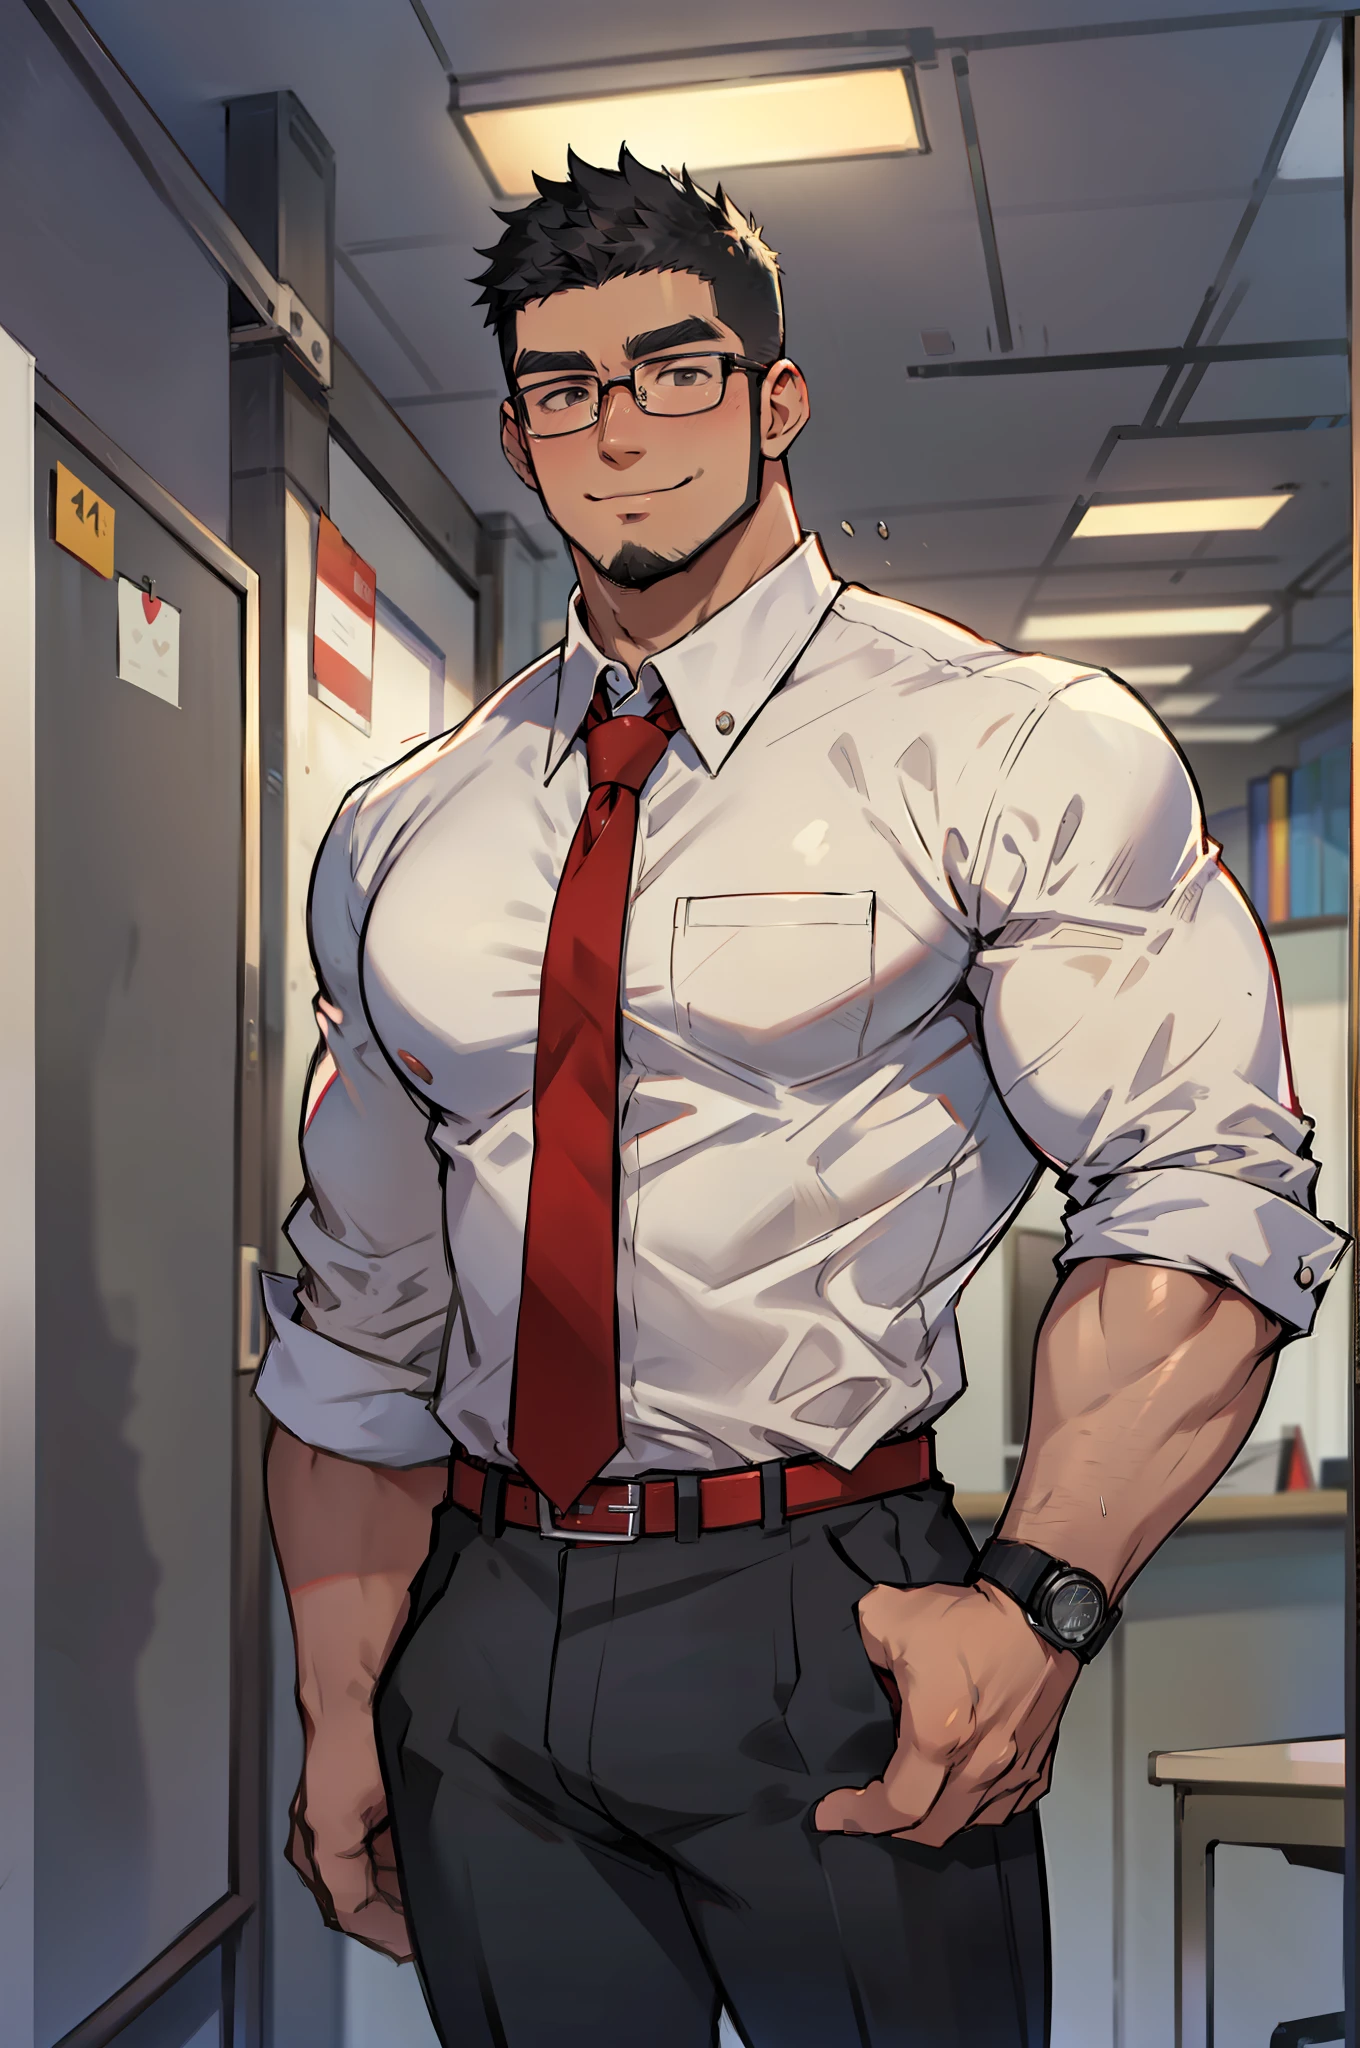 4k, masterpiece, high resolution:1.2, 1 man, 42 year old, solo, bara, muscular!!!, really tall, big physique (beast), crew cut hair, facial hair, black hair, cute smile, friendly, standing in an office, wearing formal trousers, wearing plain formal office shirt, wearing red tie, tidy outfits, wearing glasses, upstairs office in the background, ultra detailed, flat style, center